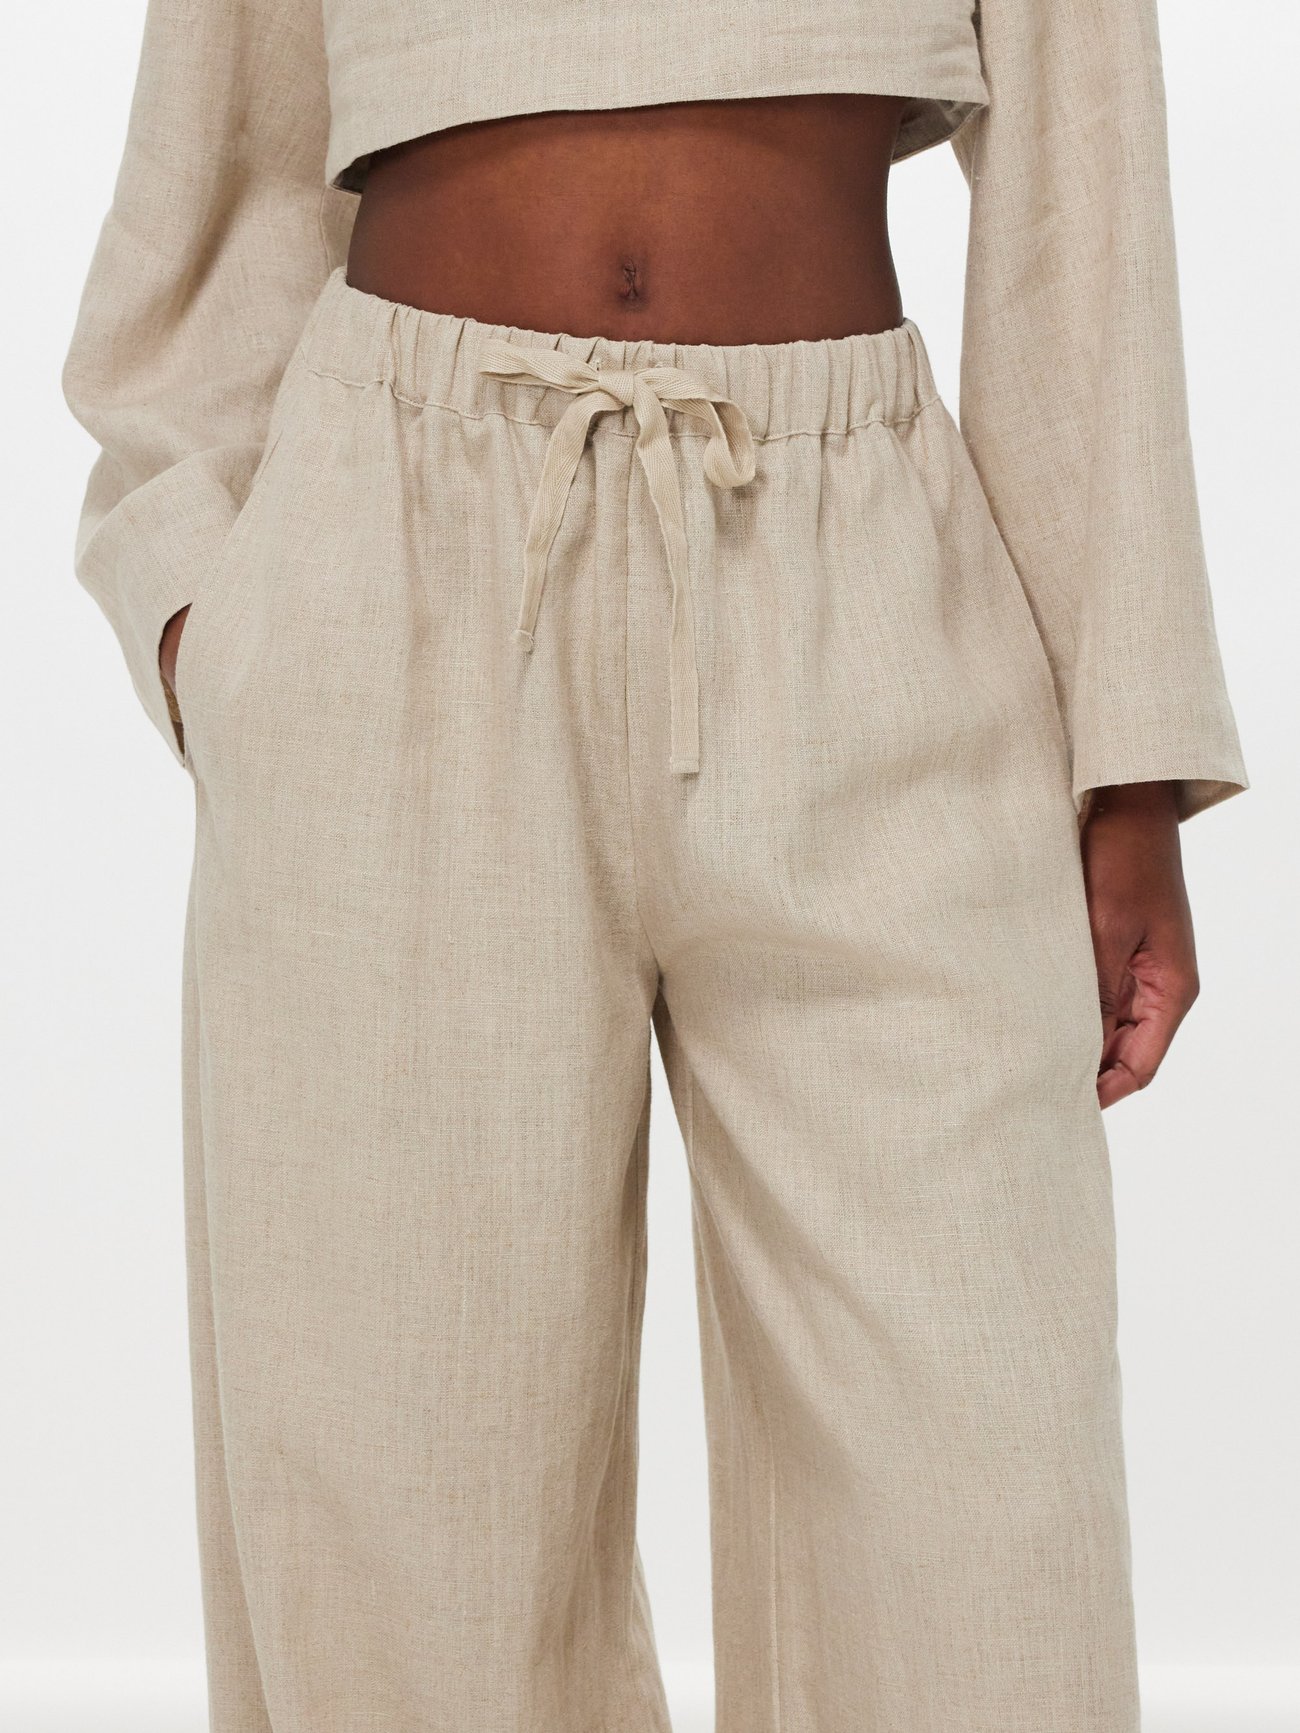 Solid Drawstring Linen/Cotton Trousers - High Waist - Light Beige -  Granqvist - Ties, shirts and accessories